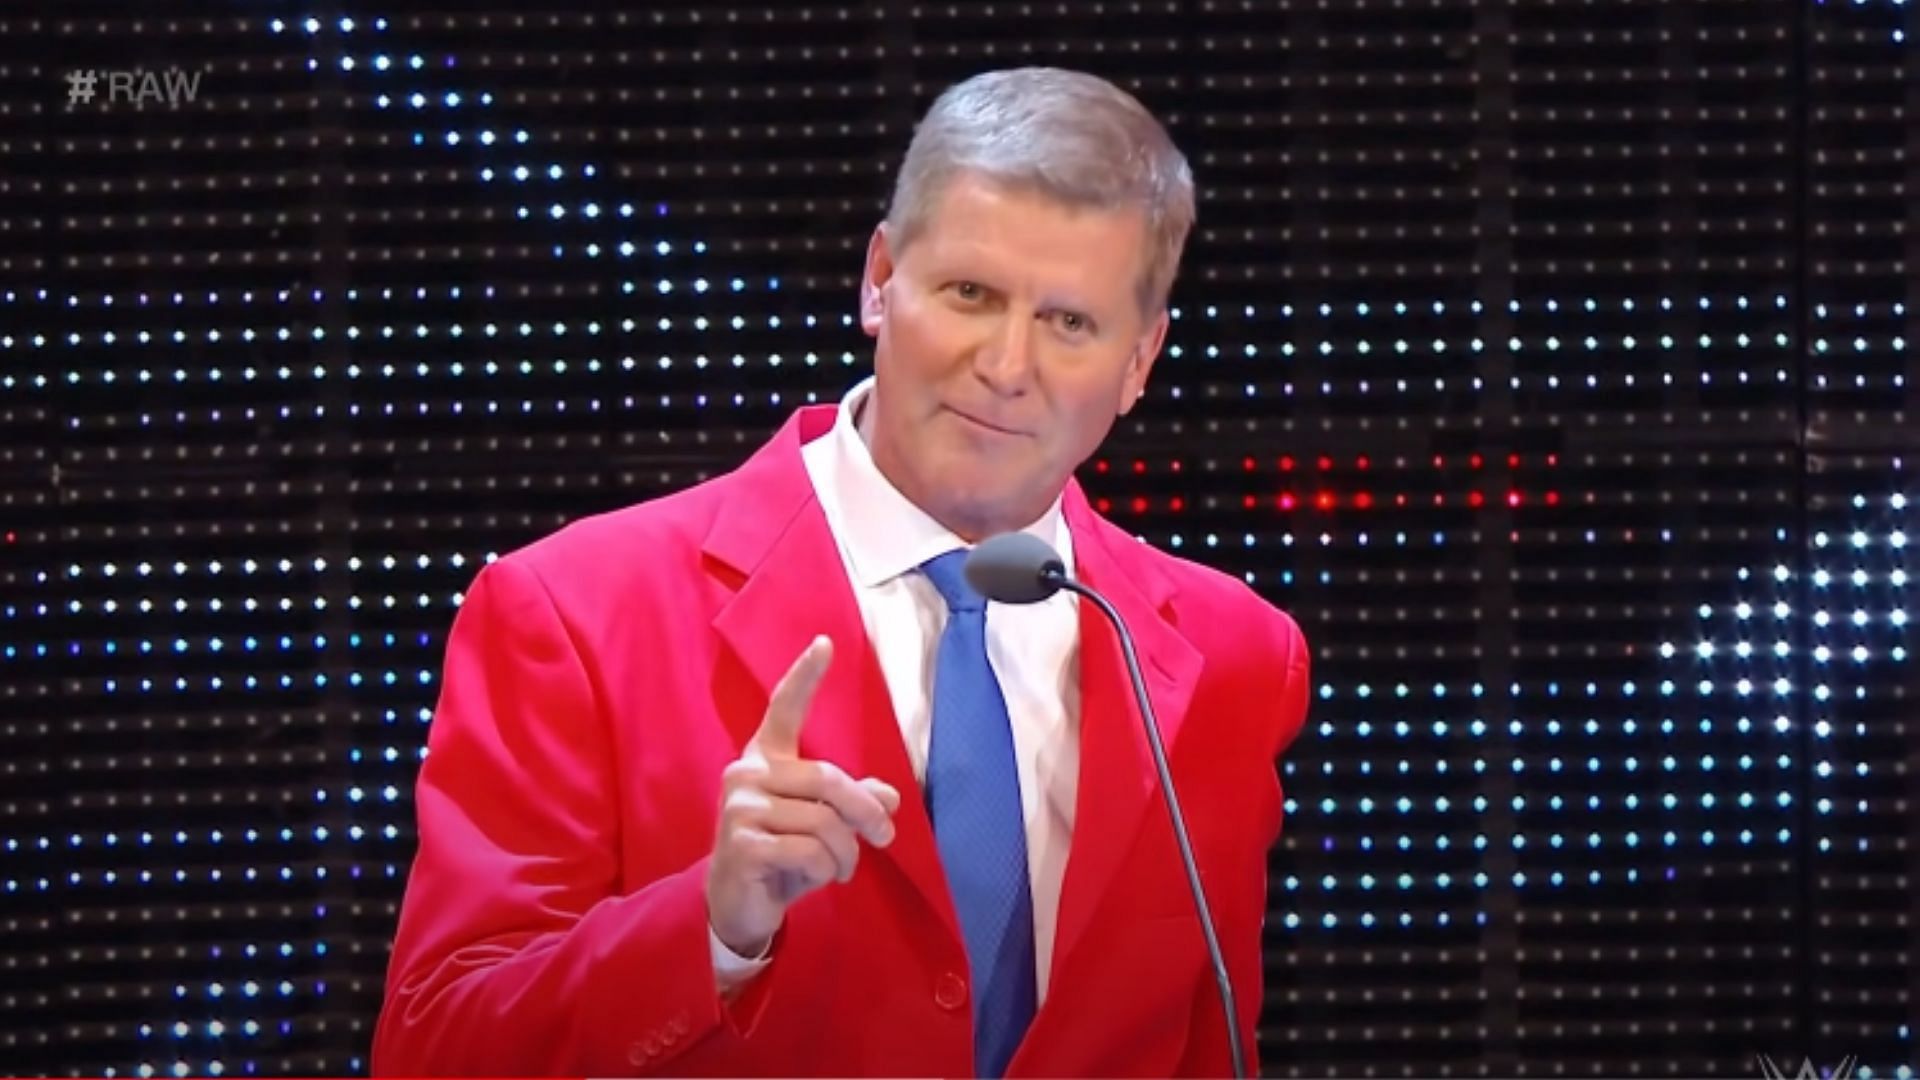 John Laurinaitis has worked for WWE since 2001.